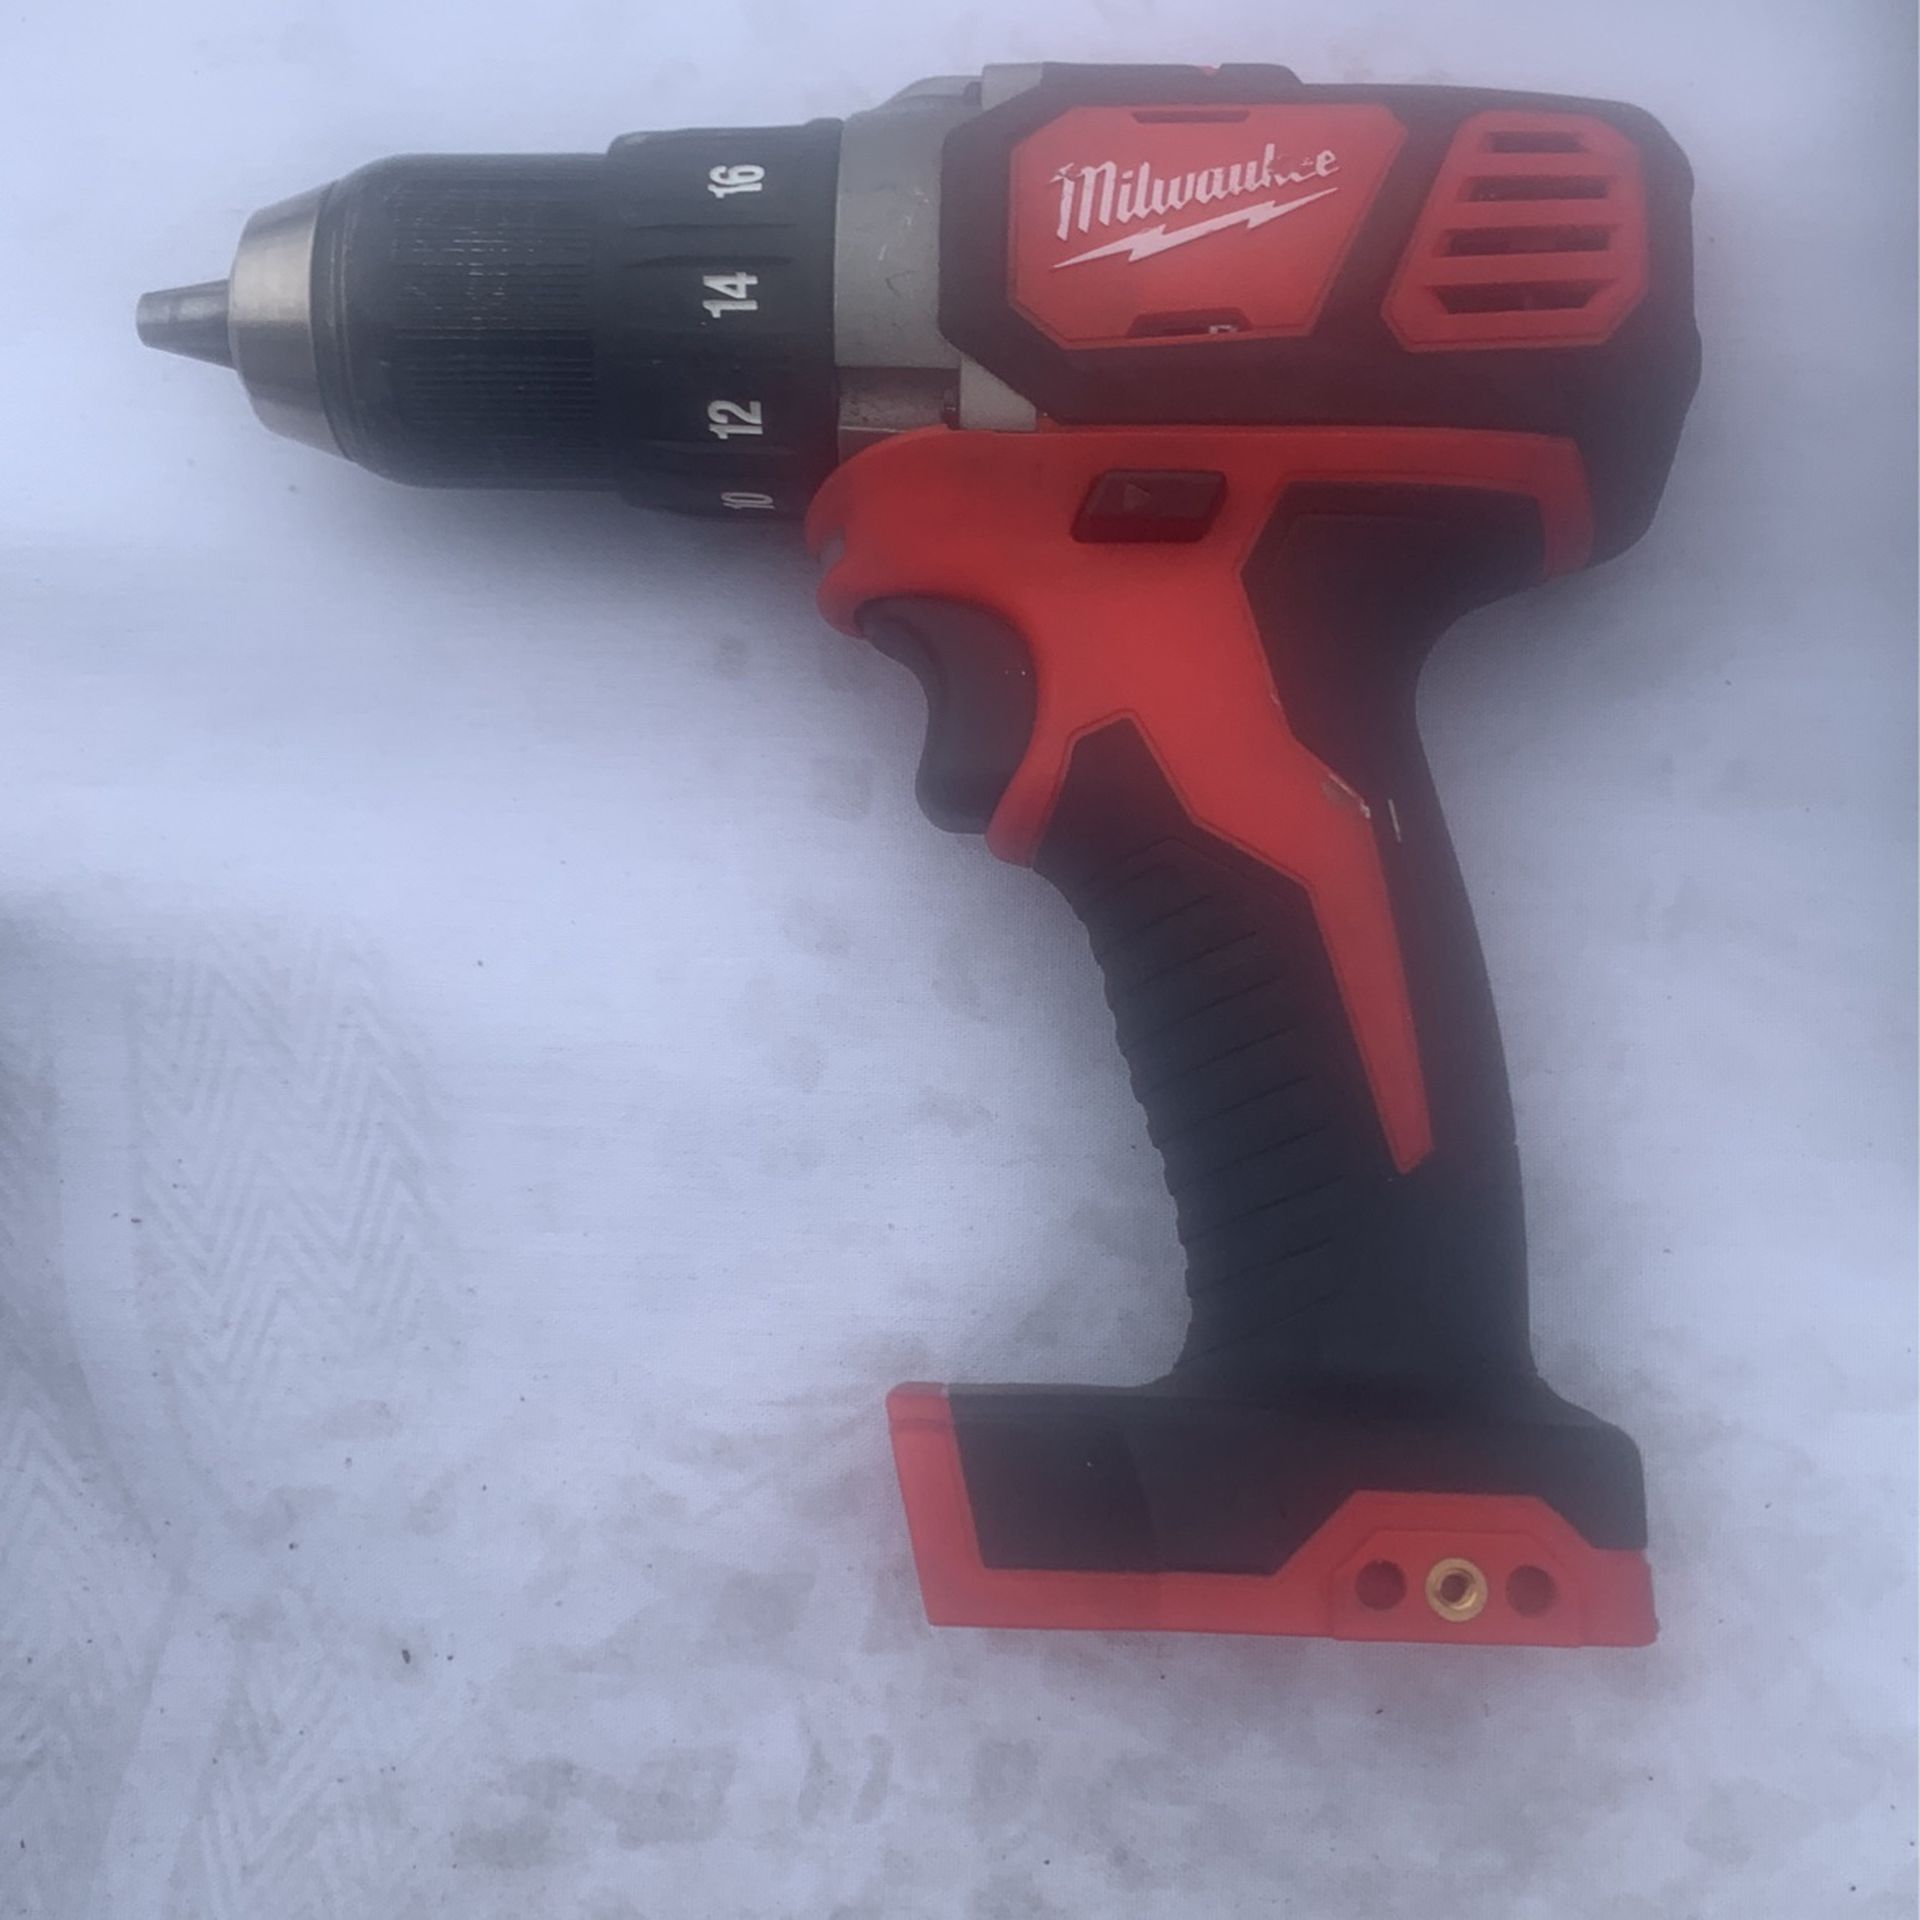 Milwaukee 18v Compact 1/2 Drill Driver 2606-20